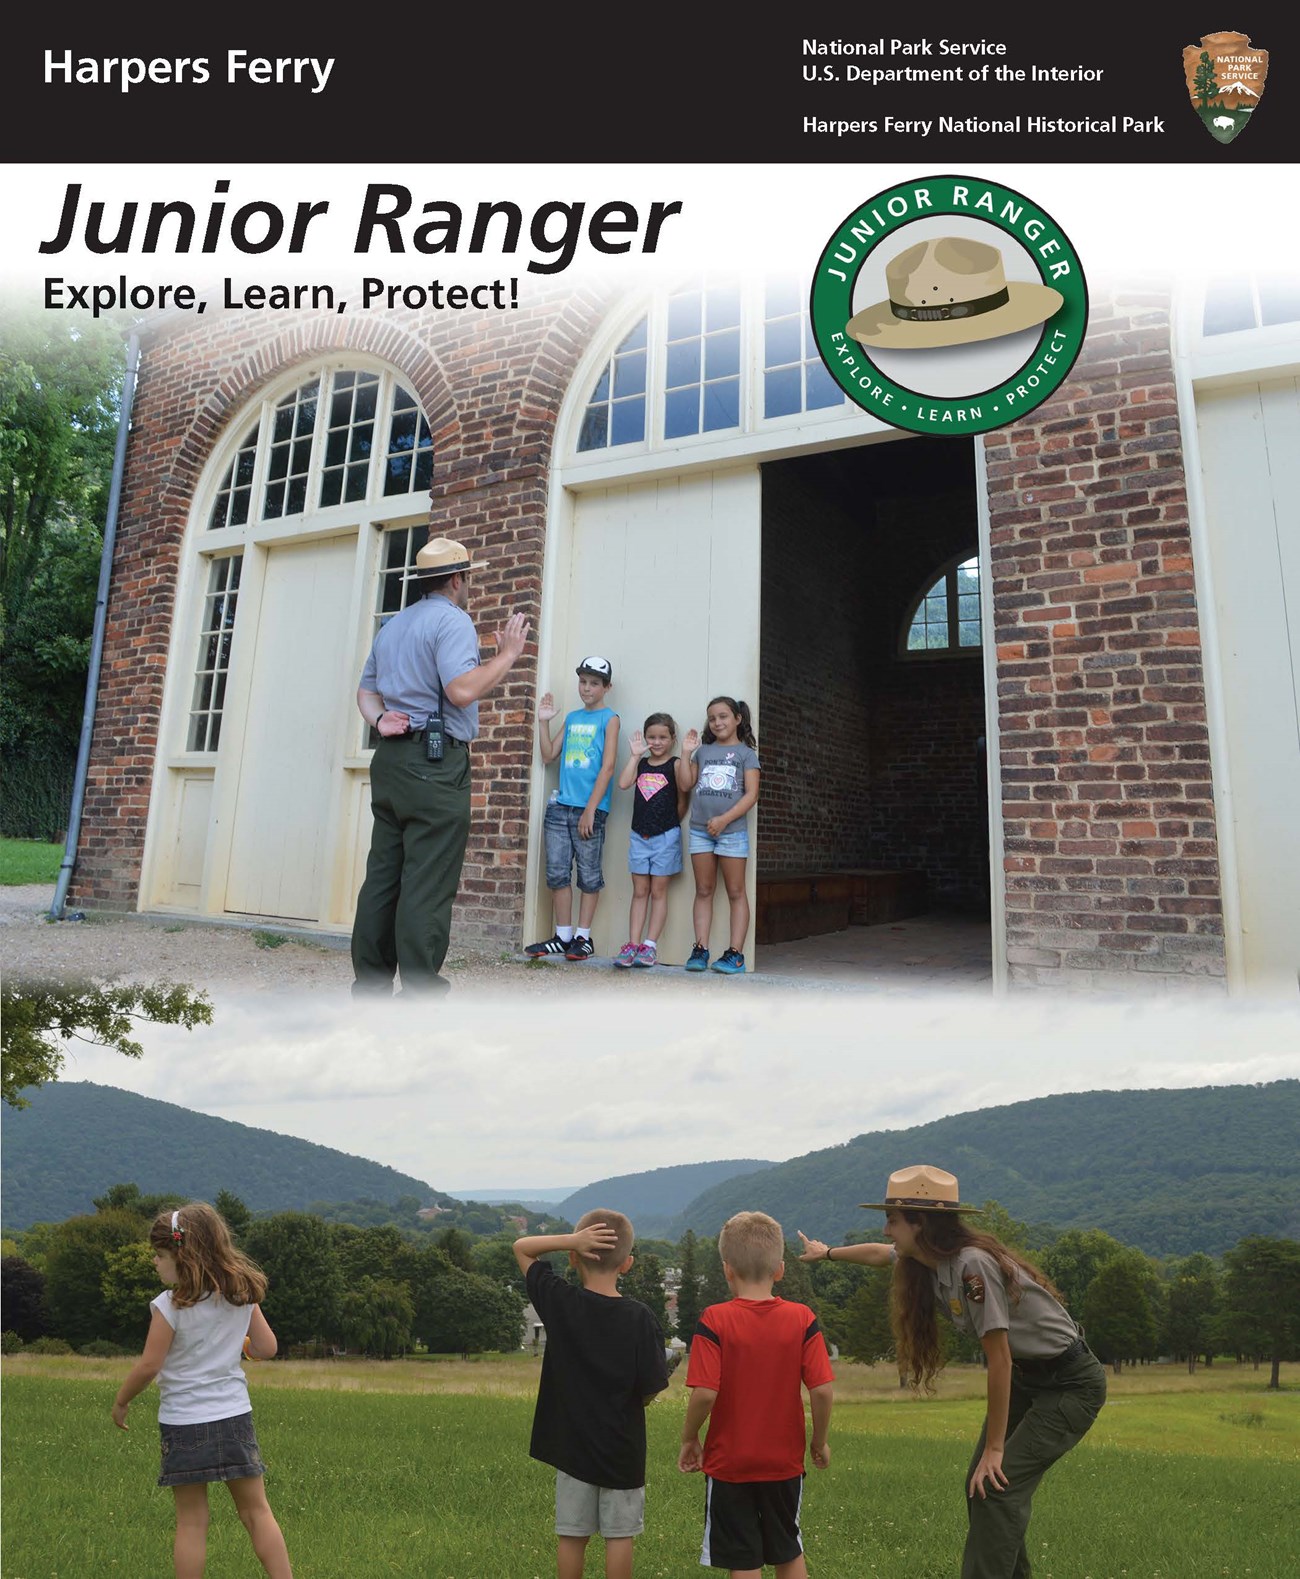 Junior Ranger Booklet cover; shows image of park ranger swearing in Junior Rangers and image of park ranger pointing out scenery to kids